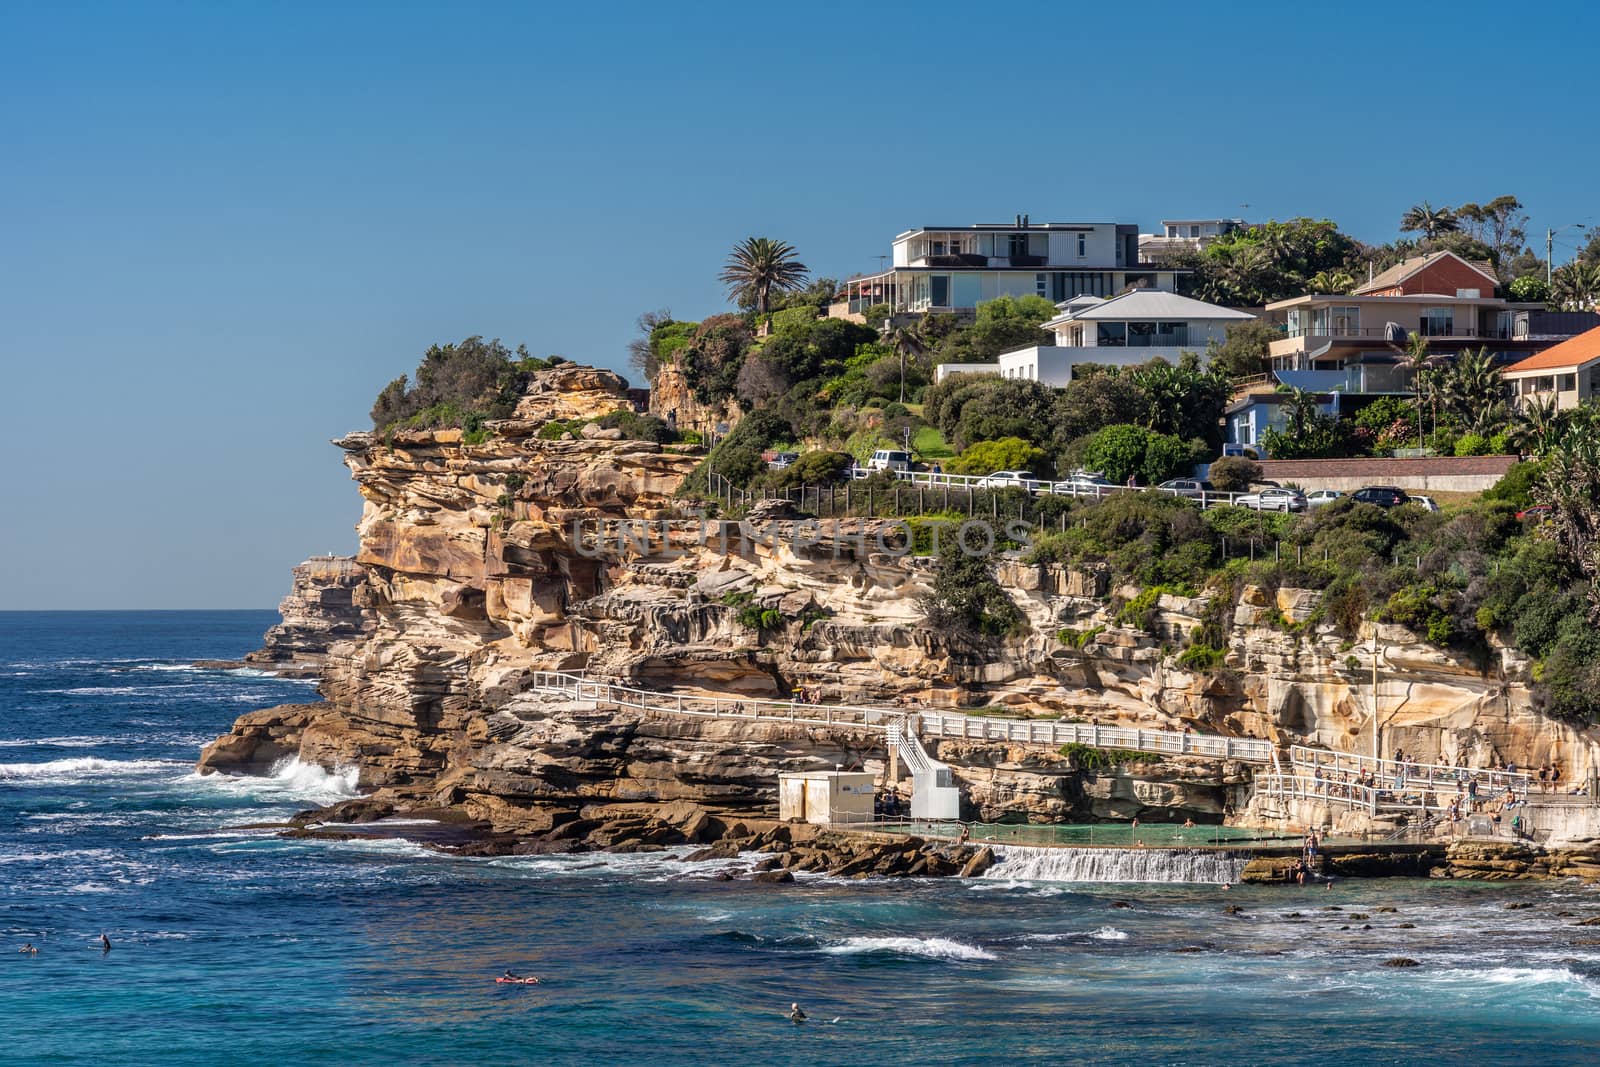 Sydney, Australia - February 11, 2019: Focus on the South Cliff at Bronte Beach with swimming pool in front. Peple in water. Housing in green vegetation on top of rocks.